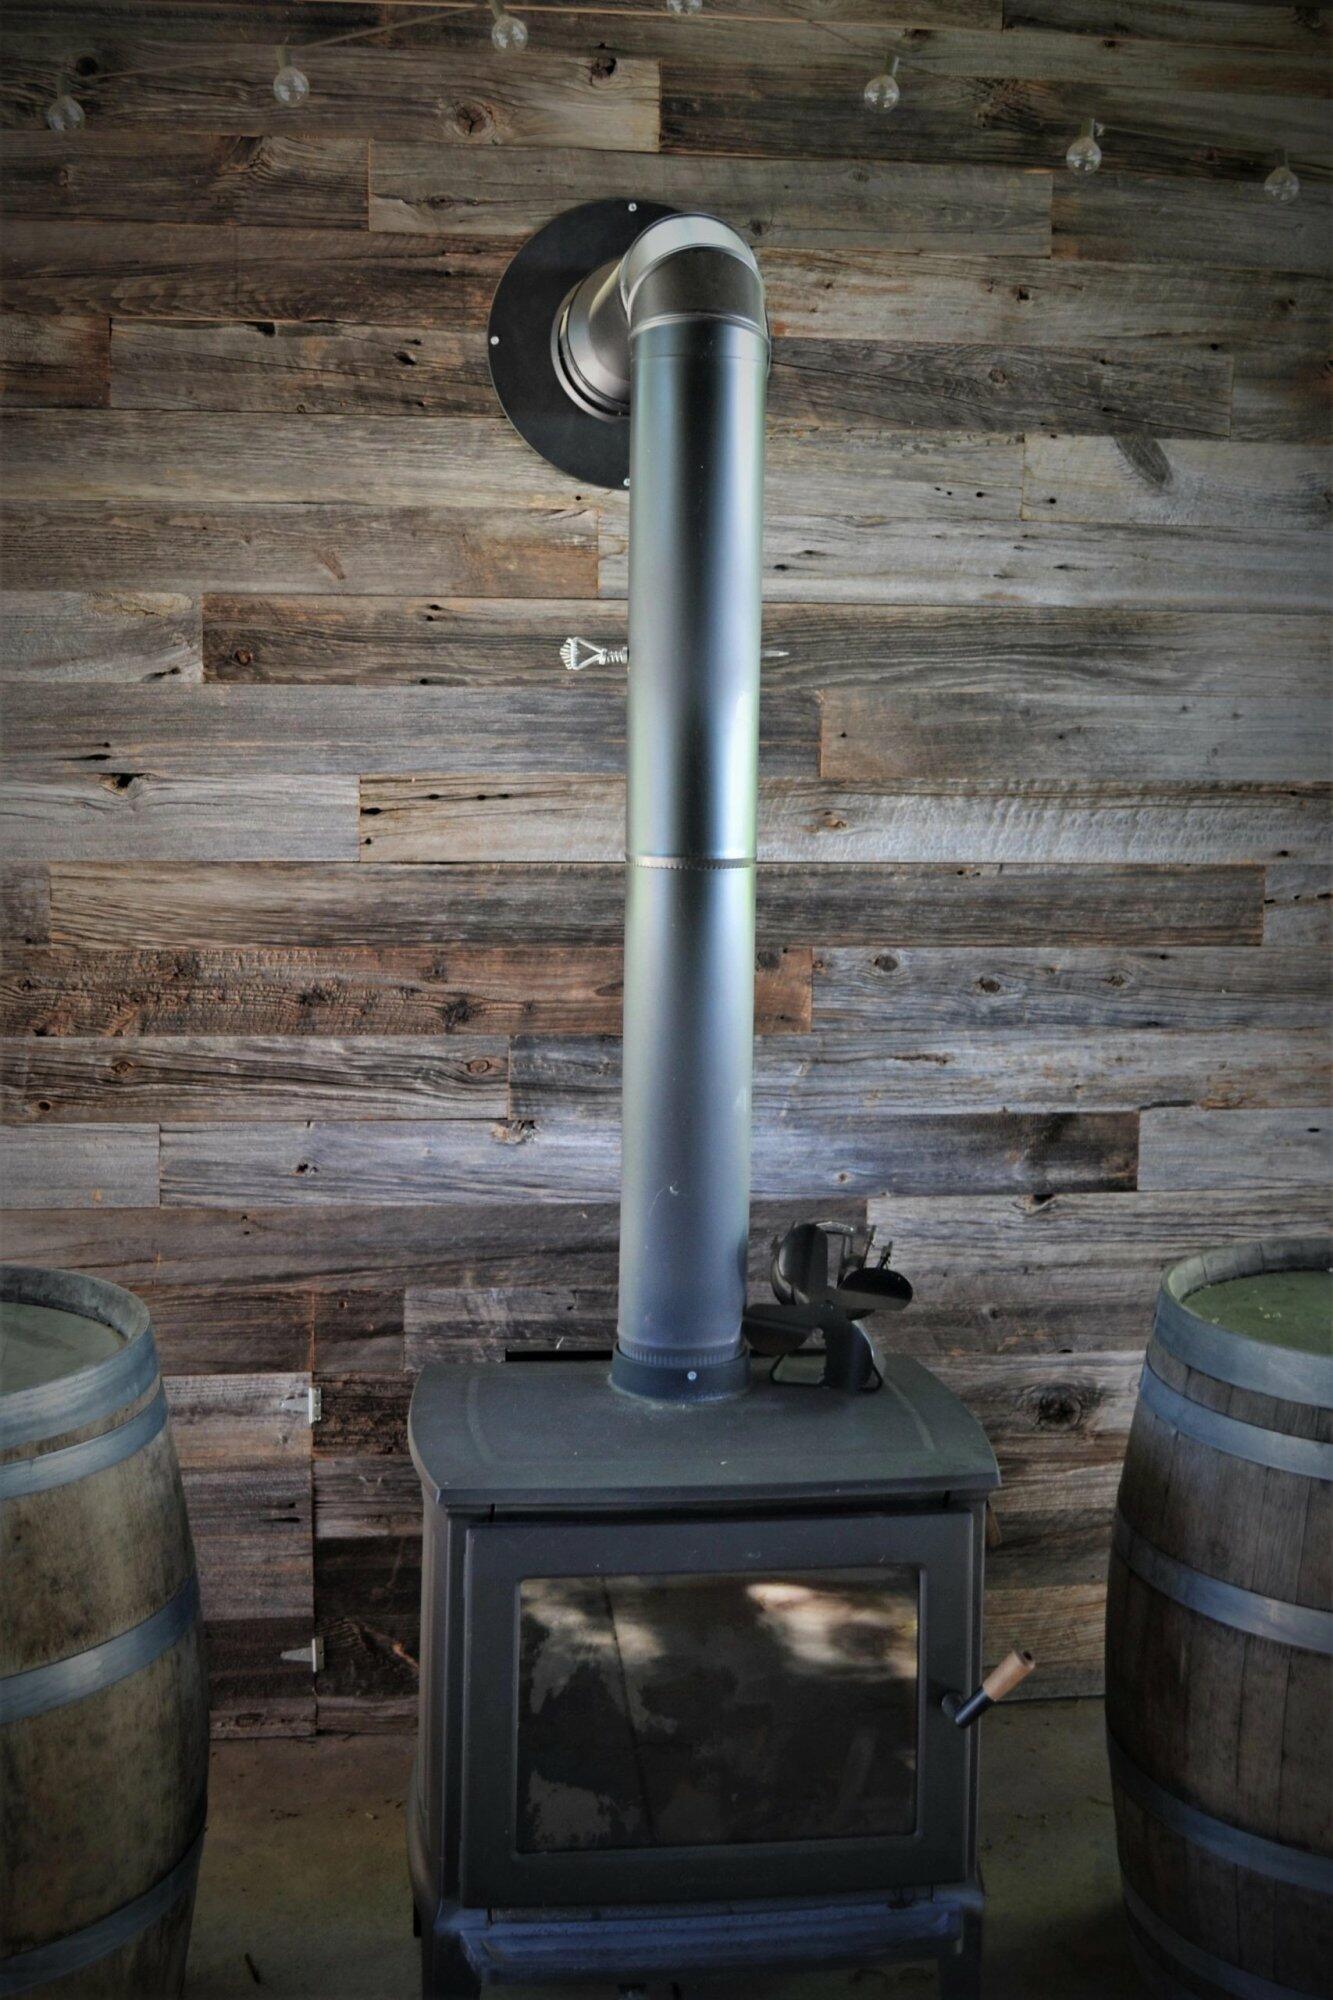 weathered grey barnwood paneling installed behind a wood stove. Variations of color, texture, and characteristics displayed throughout.